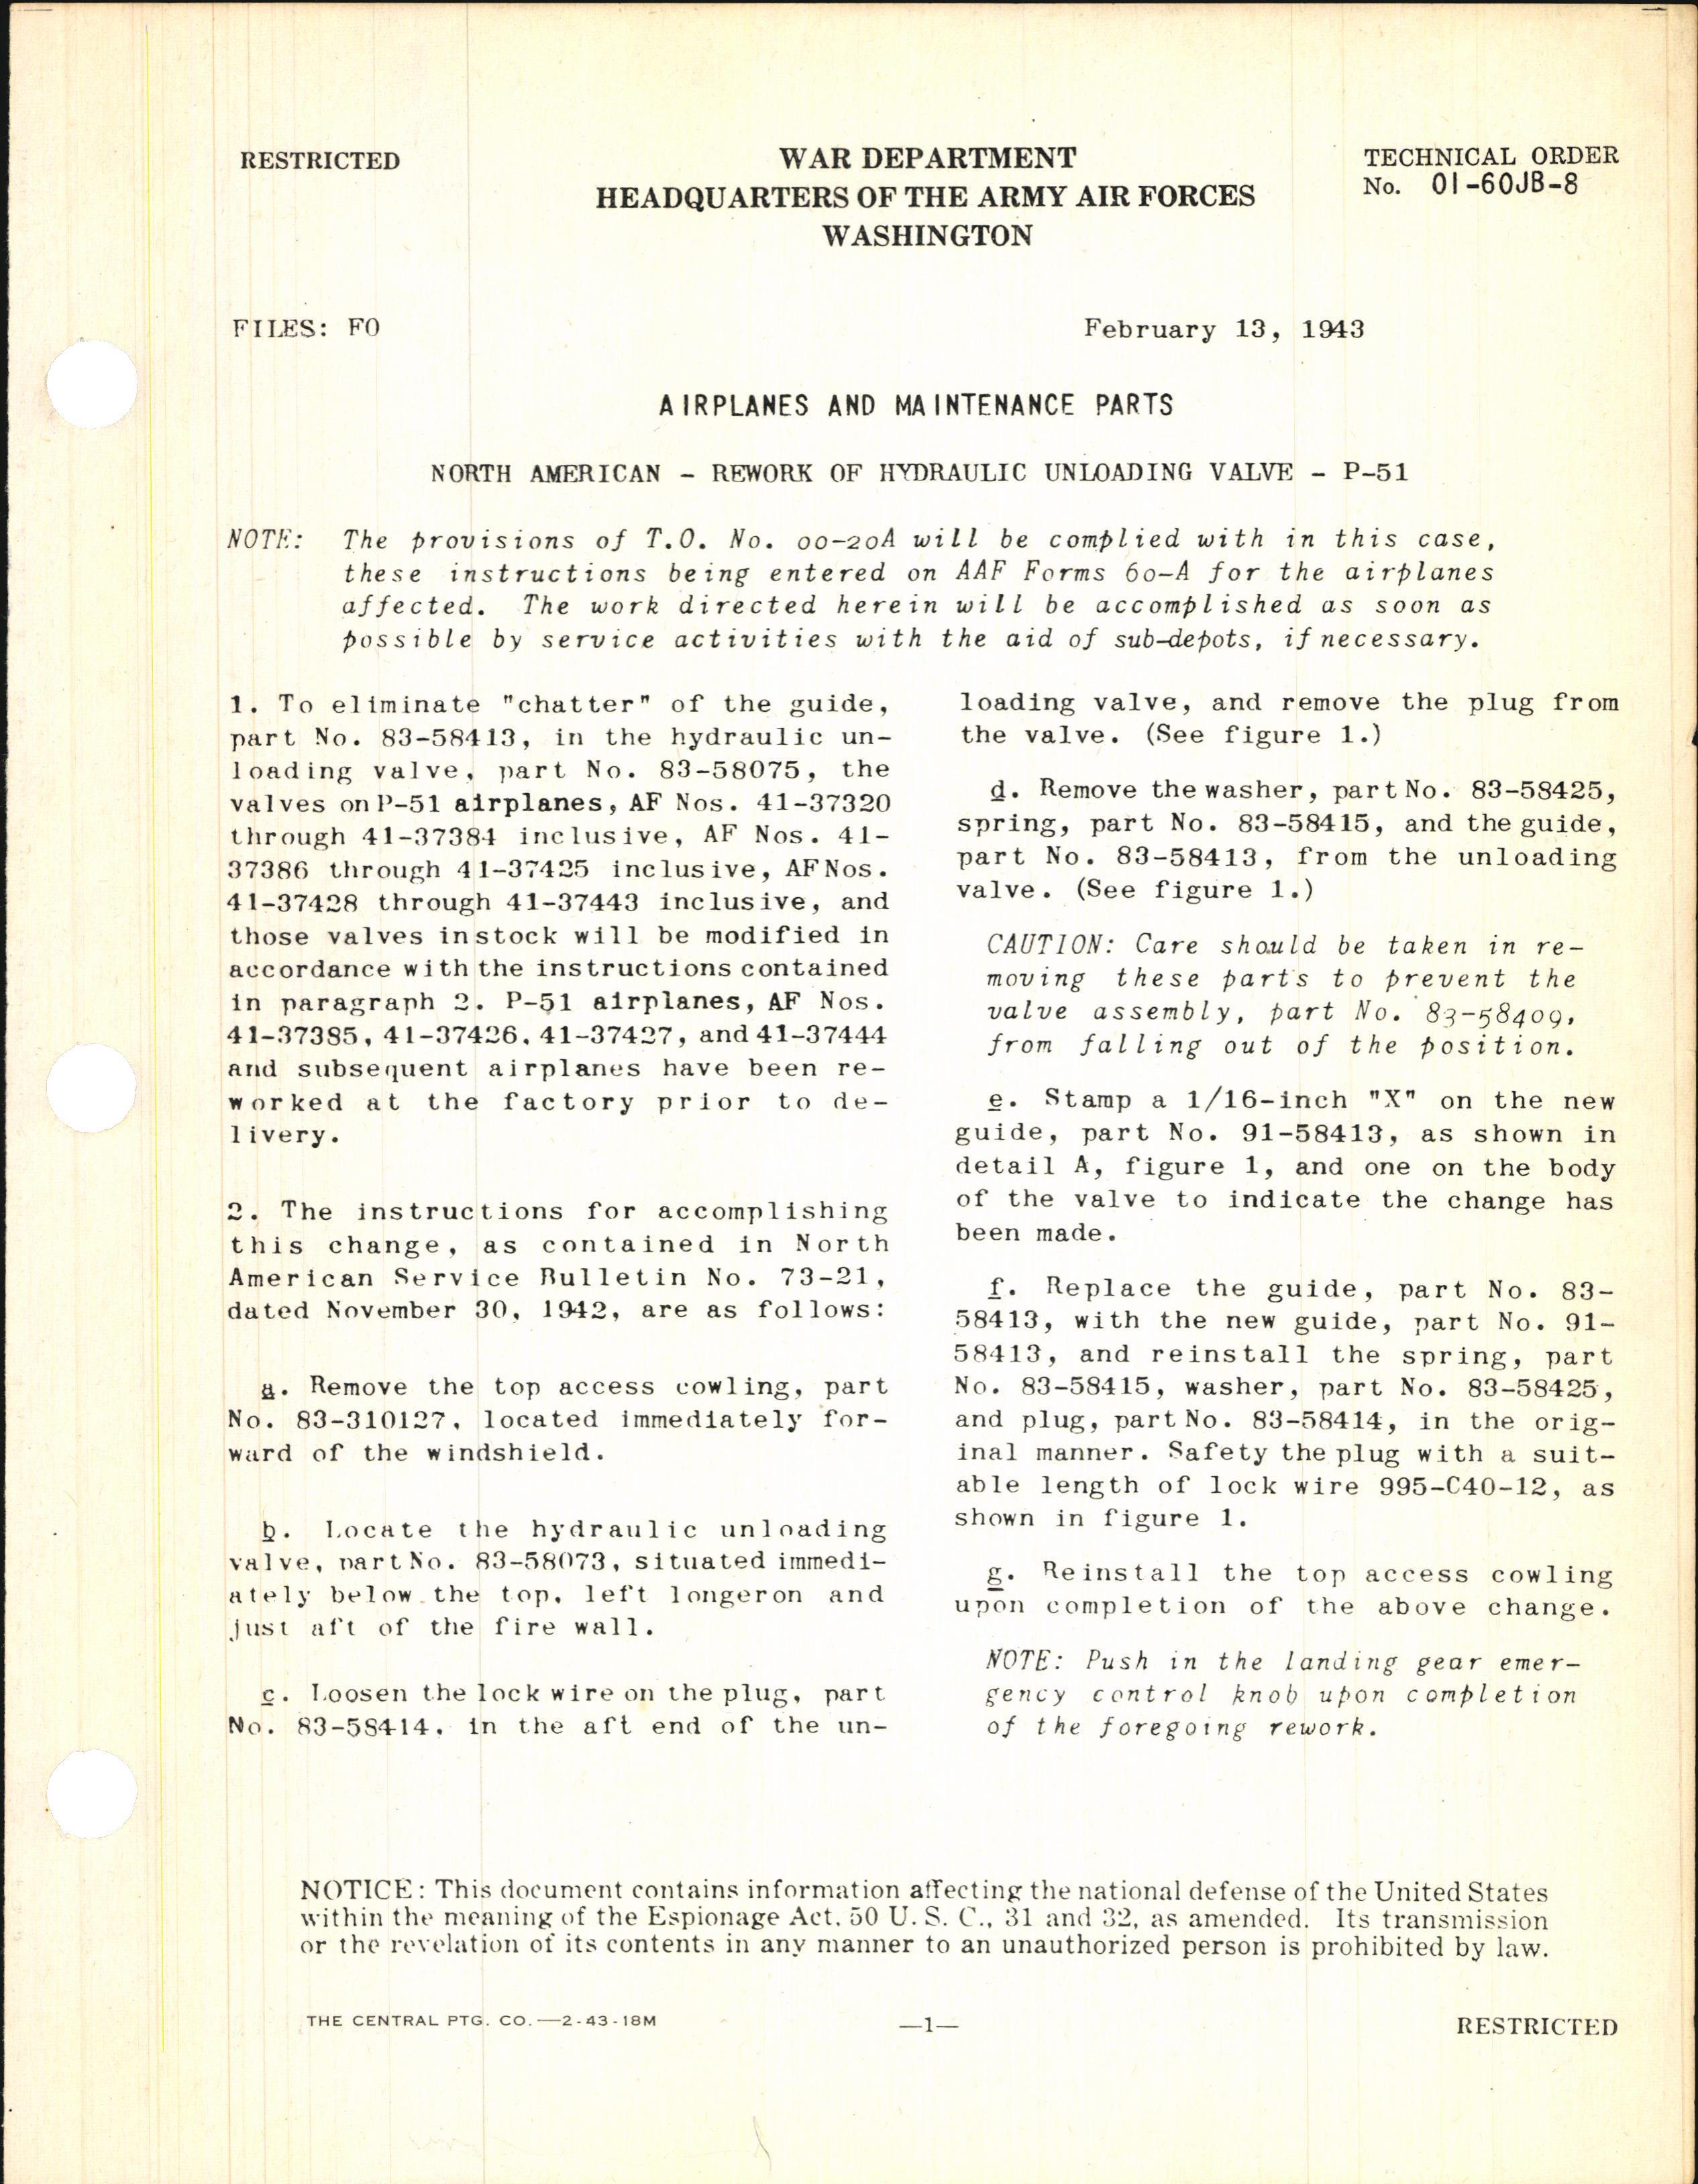 Sample page 1 from AirCorps Library document: Rework of Hydraulic Unloading Valve for P-51